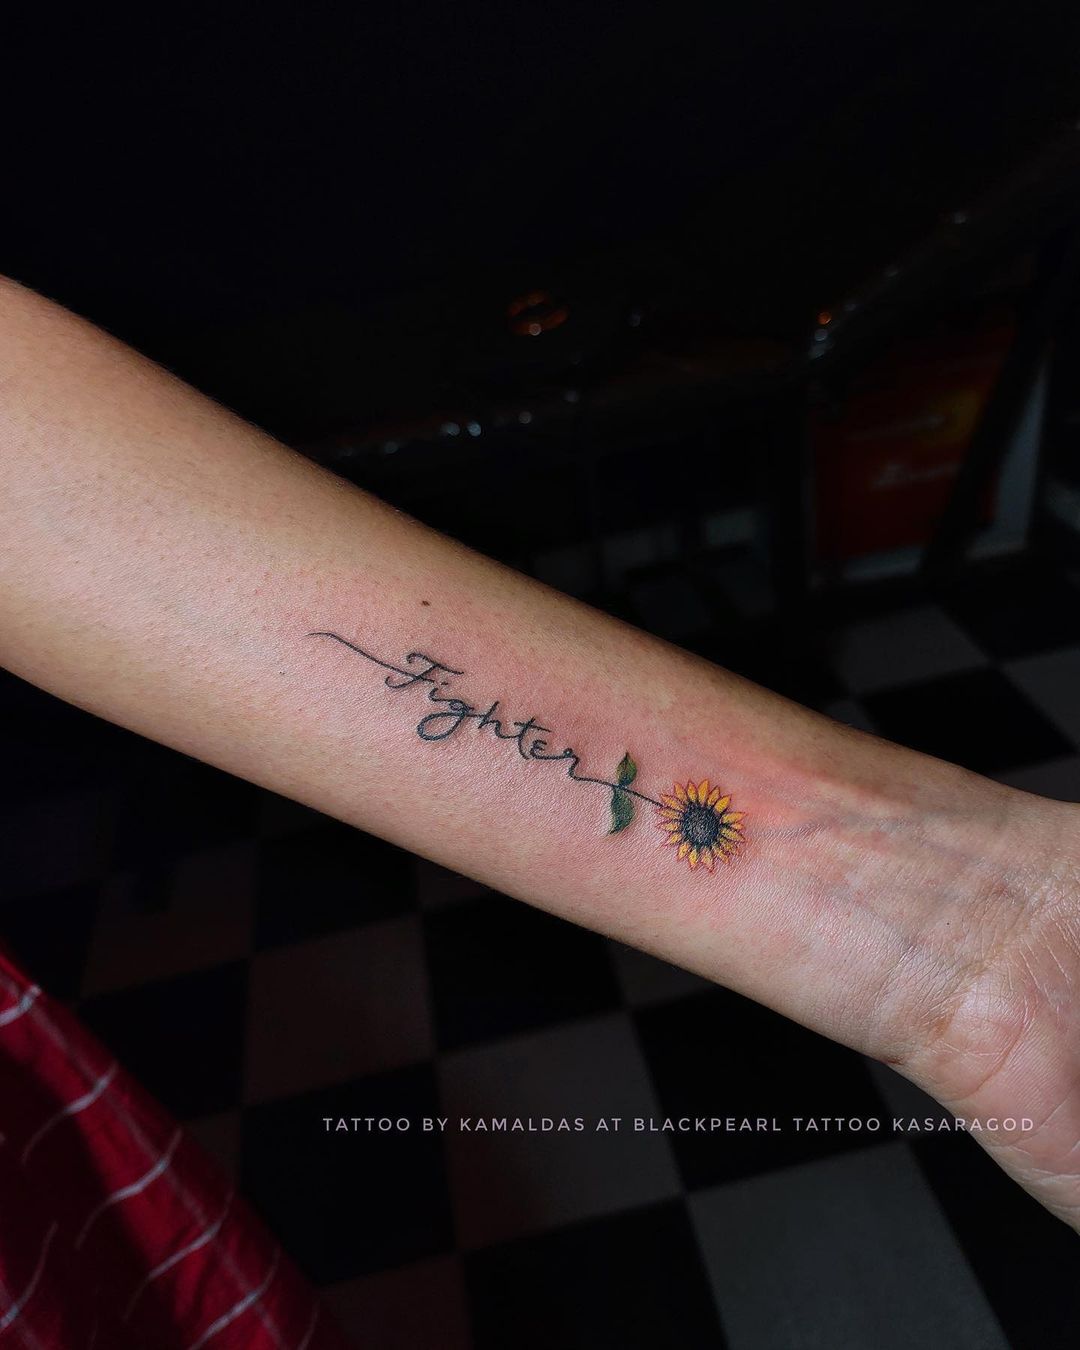 Turn Life Into Words,MeaningfuL Tattoo For Women - Page 22 of 27 -  Dazhimen#tattooideas#tattoos#women#s… | Strong tattoos, Inspirational  tattoos, Stay strong tattoo